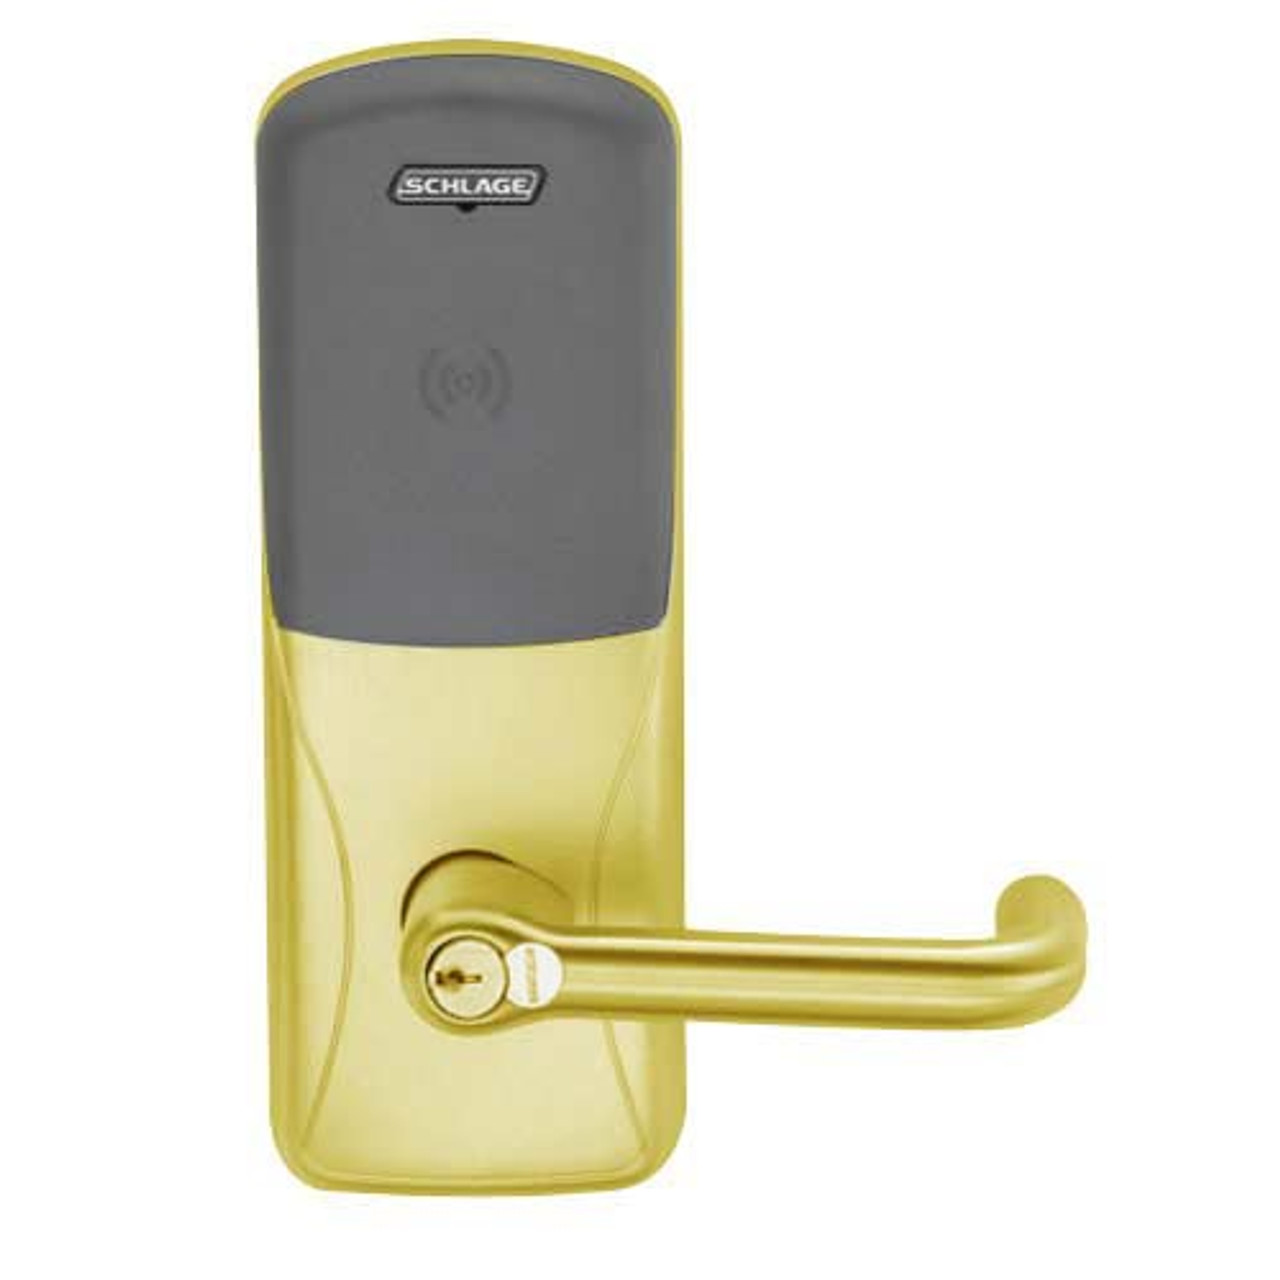 CO200-MD-40-PR-TLR-GD-29R-605 Mortise Deadbolt Standalone Electronic Proximity Locks in Bright Brass